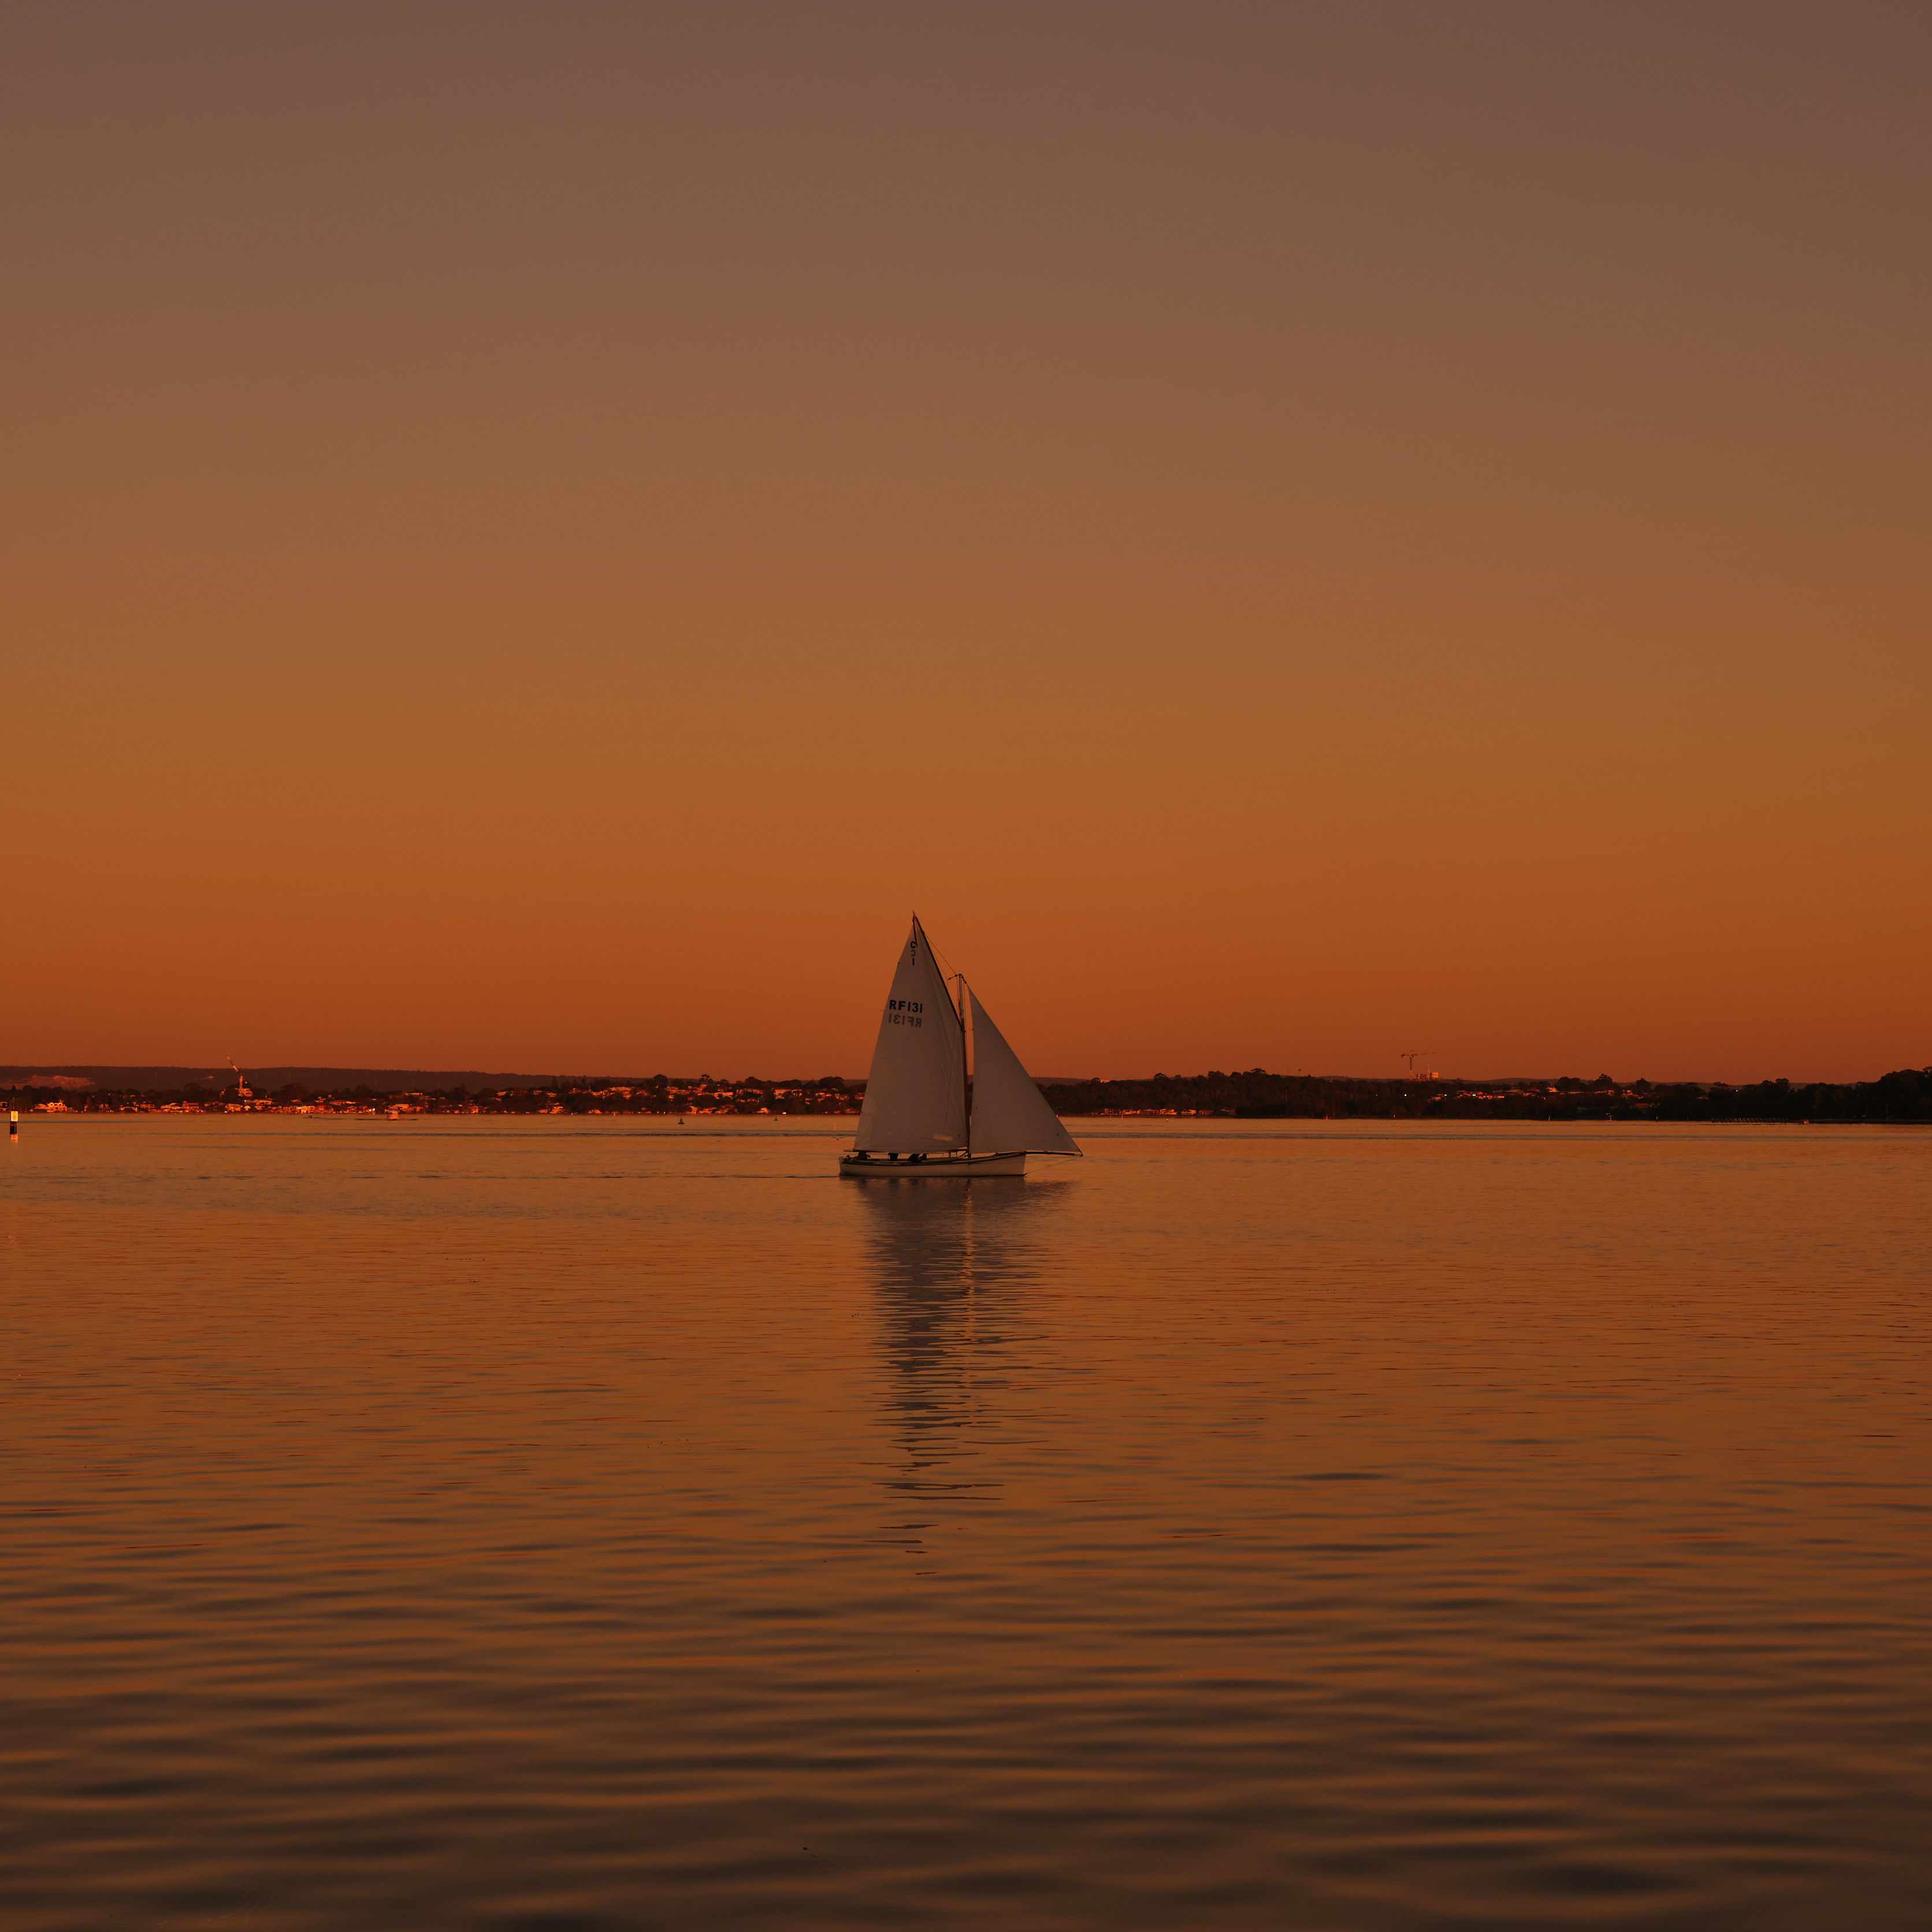 A yacht on a glassy river at sunset